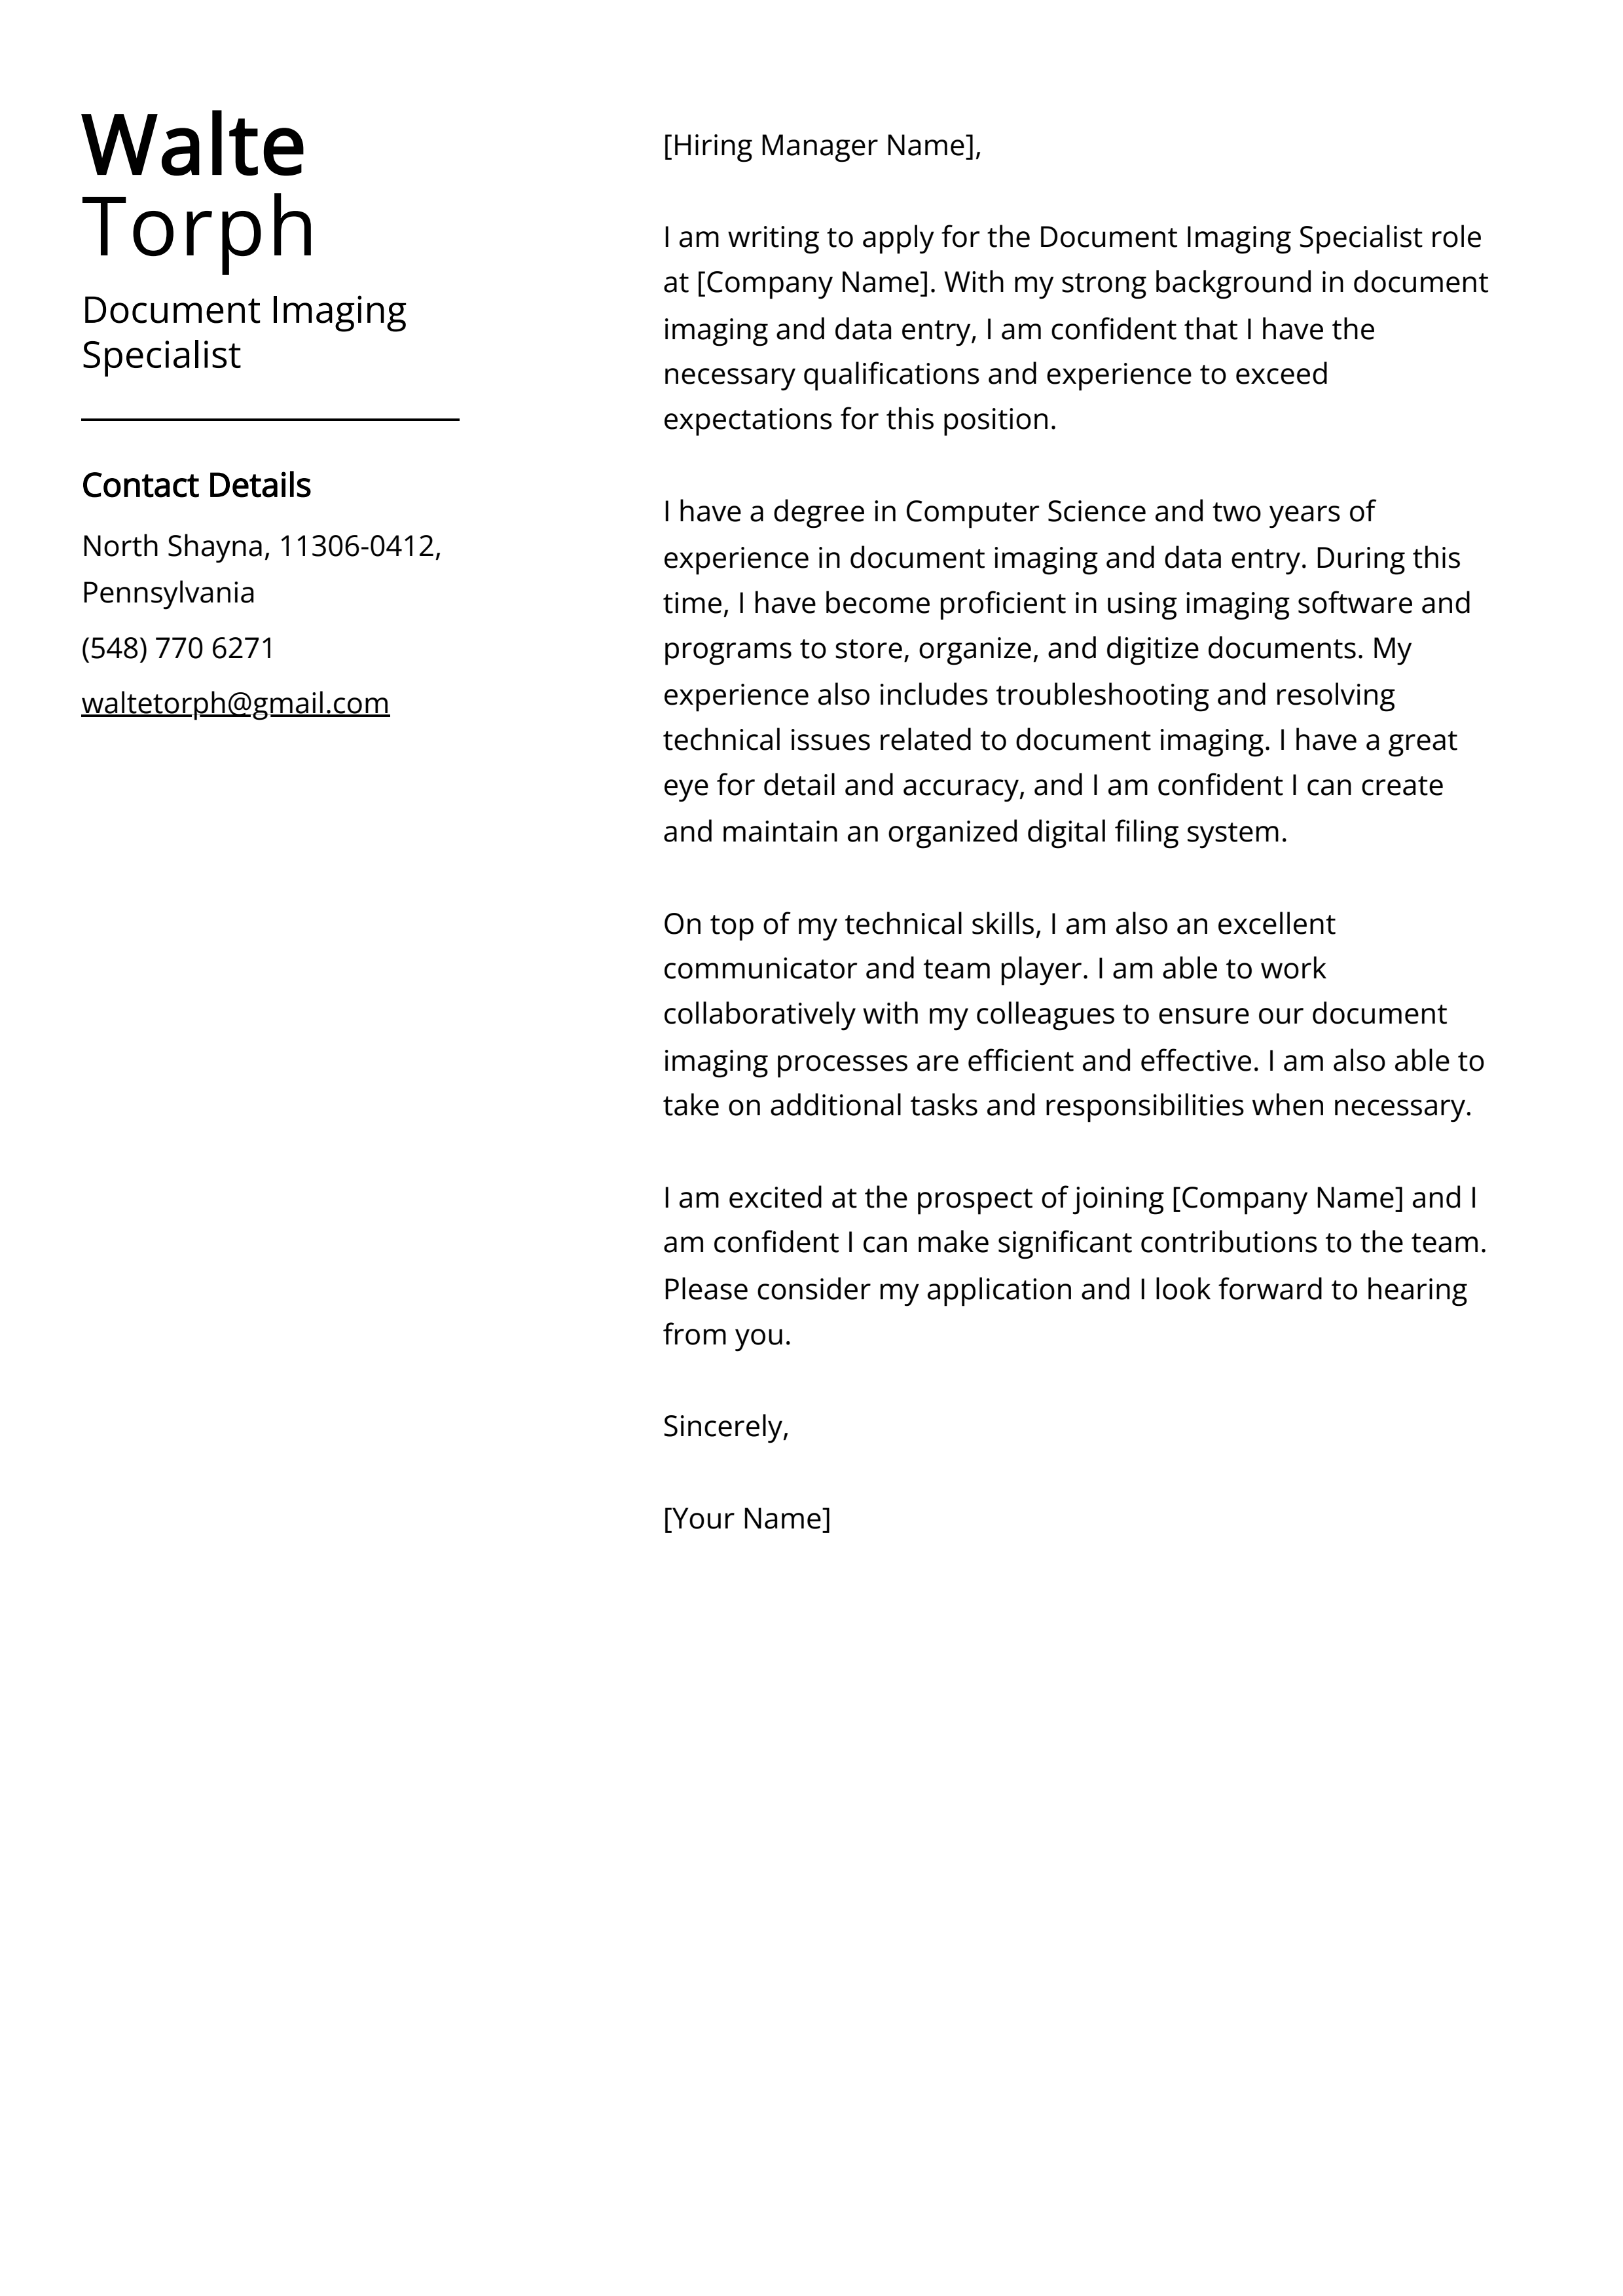 Document Imaging Specialist Cover Letter Example